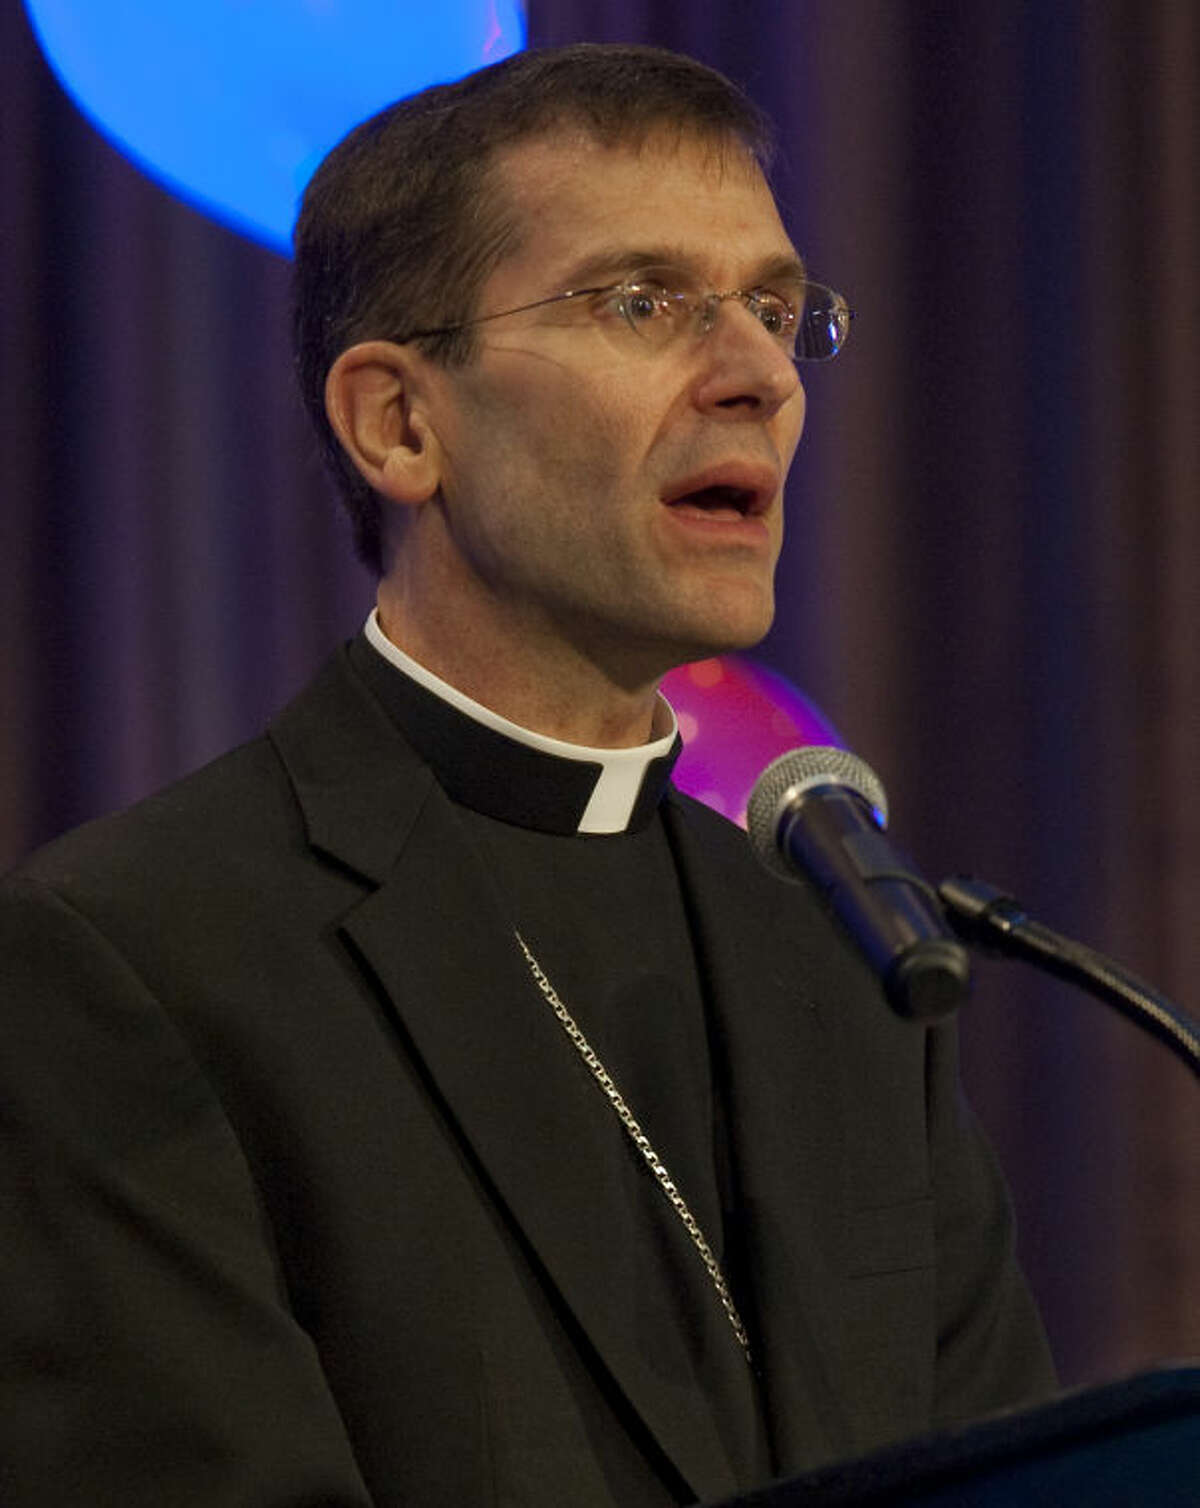 Bishop Michael Sis of San Angelo gives the invocation Wednesday at A Midland Prayer Breakfast.